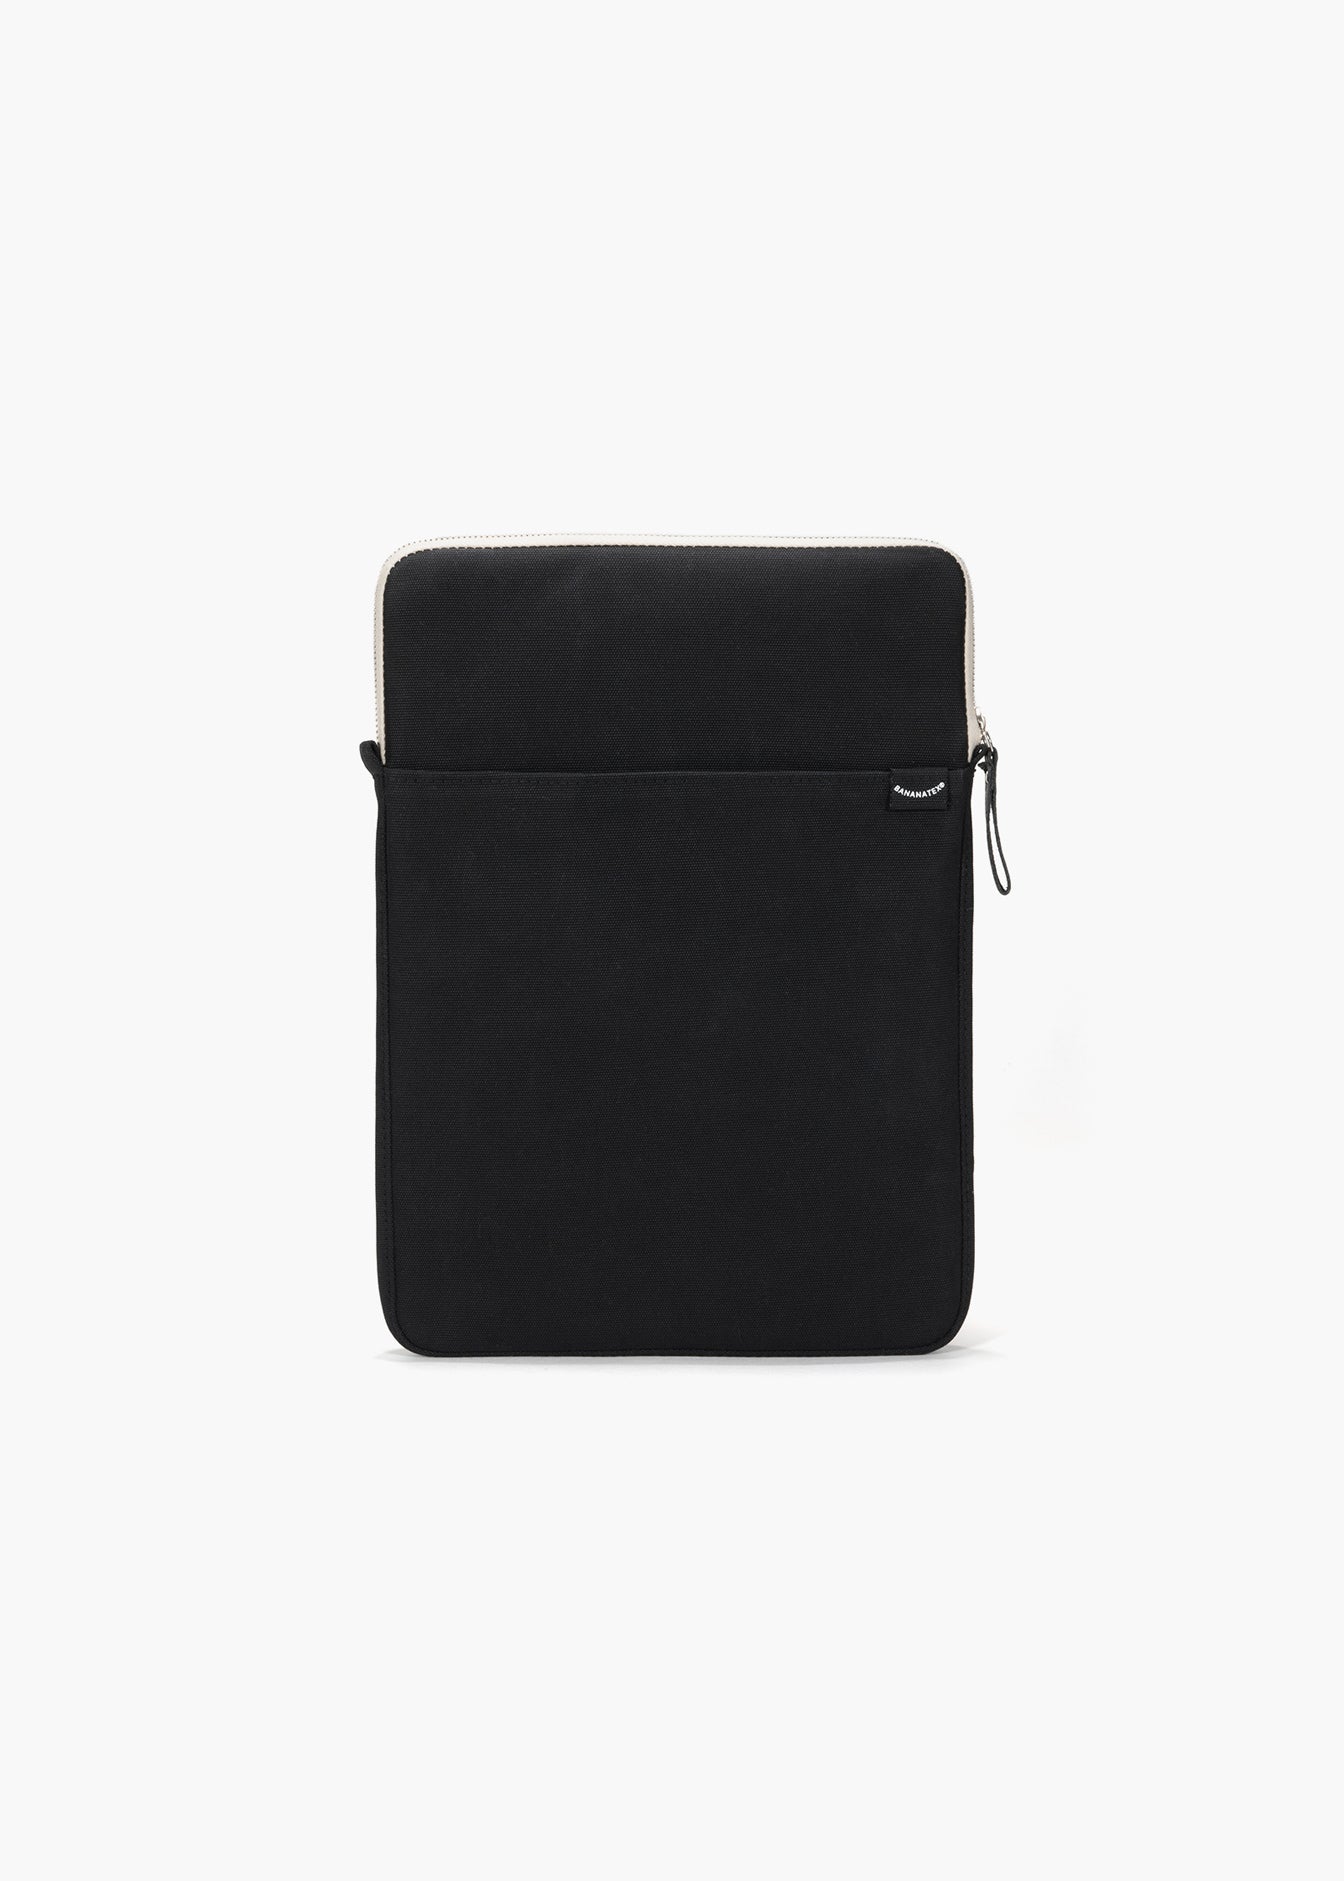 Bananatex Sleeve for Macbook 16" – All Black - QWSTION